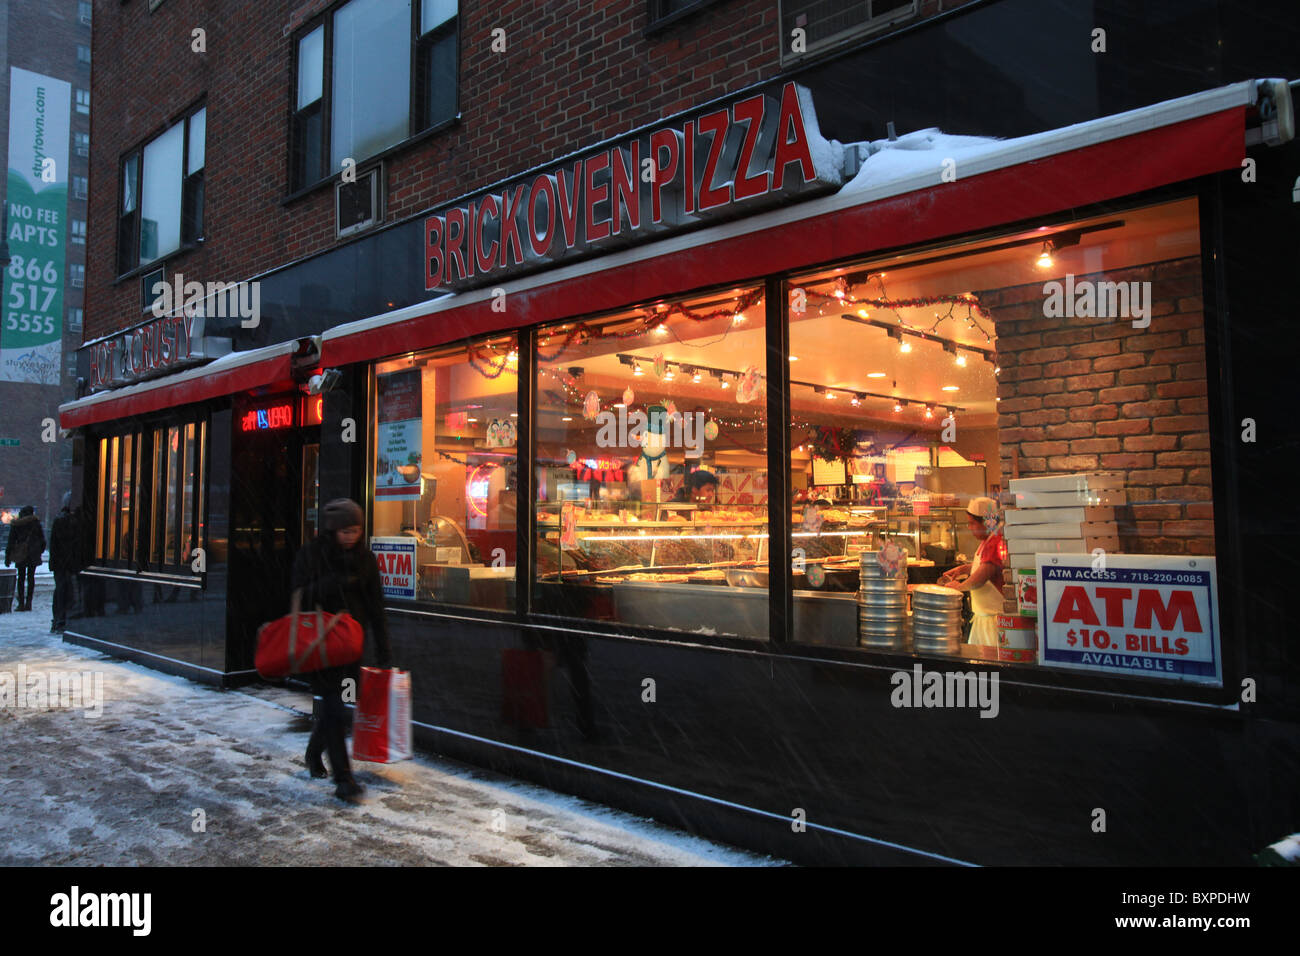 Brick oven pizza store on Third avenue, New York city, in the great  blizzard that came in Christmas 2010 Stock Photo - Alamy